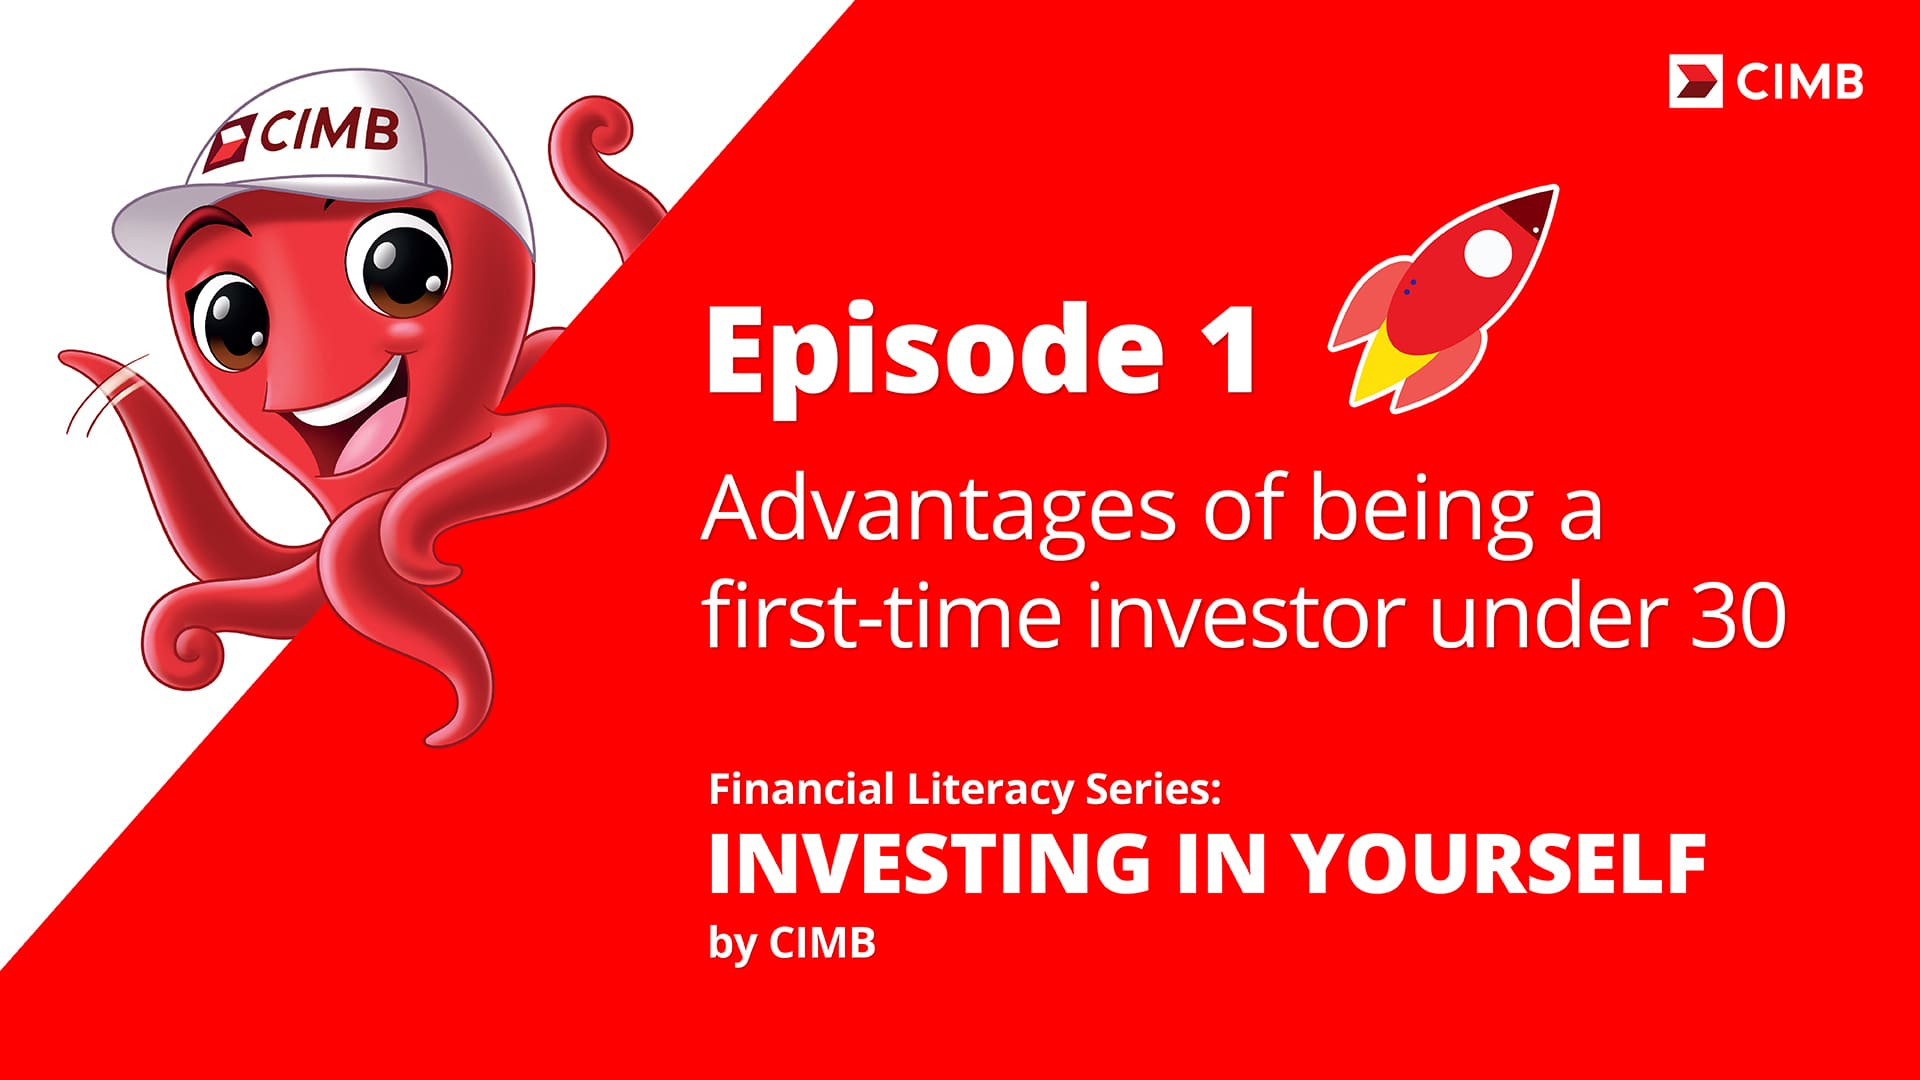 Investing 101 - learn how to make your money work for you